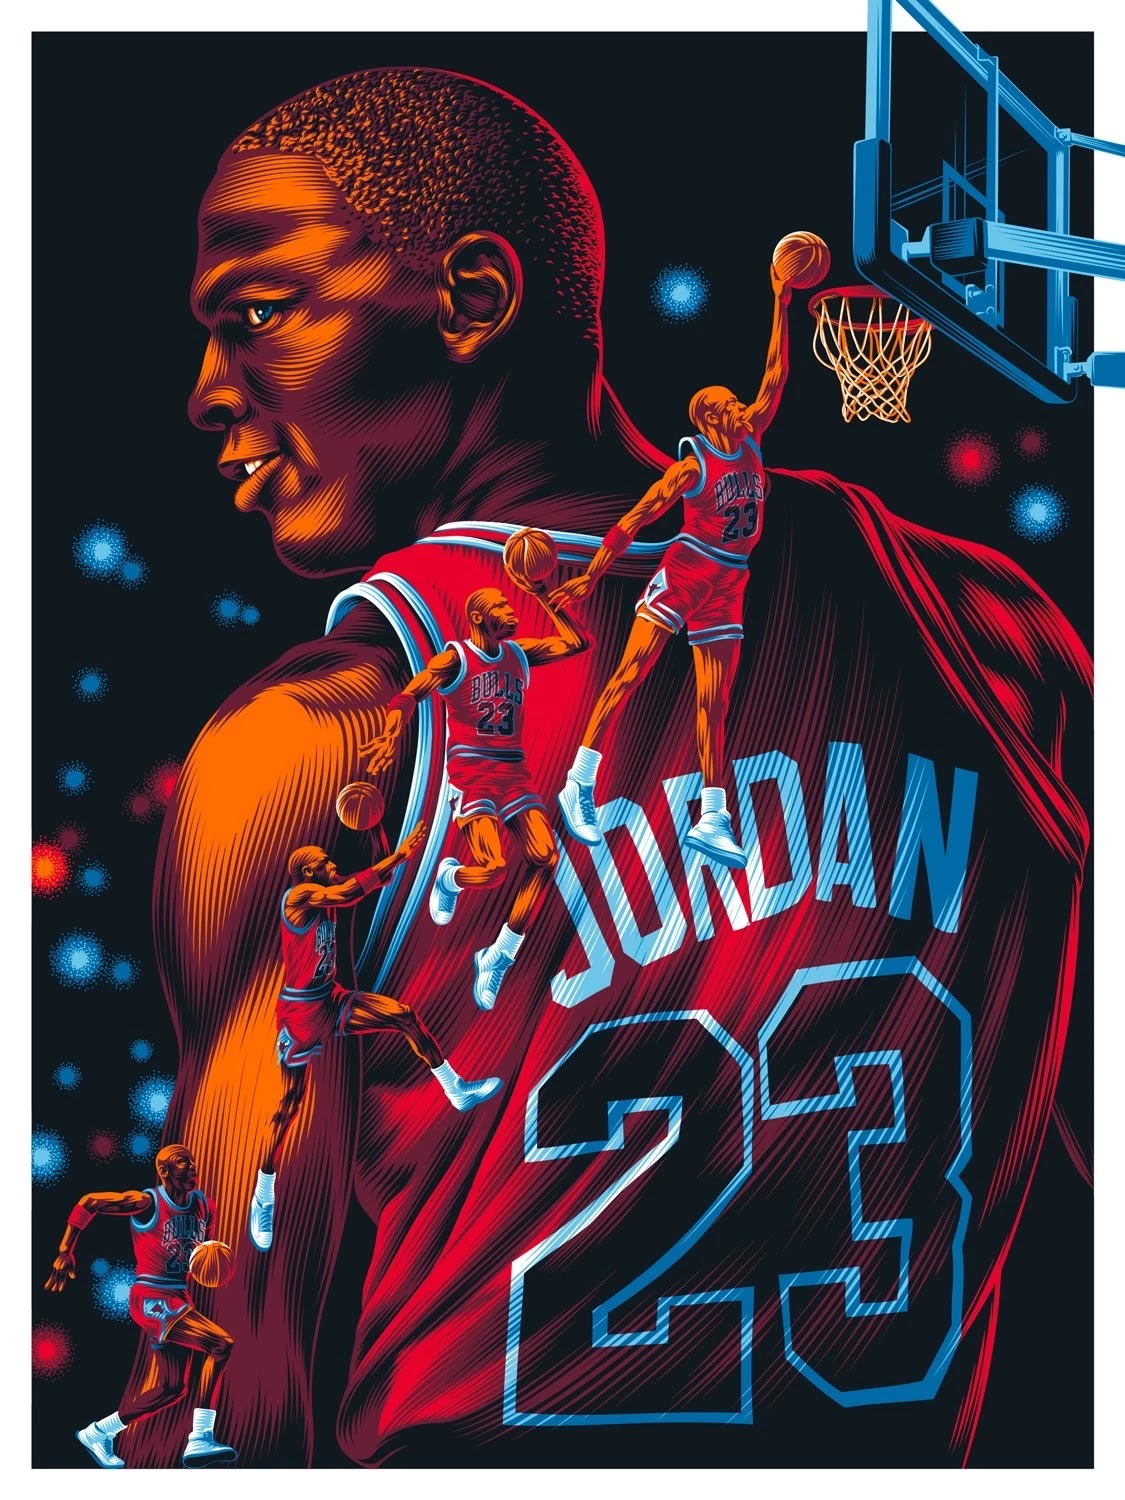 Michael Jordan, THE GOAT #6 - Untitled Collection #14234677